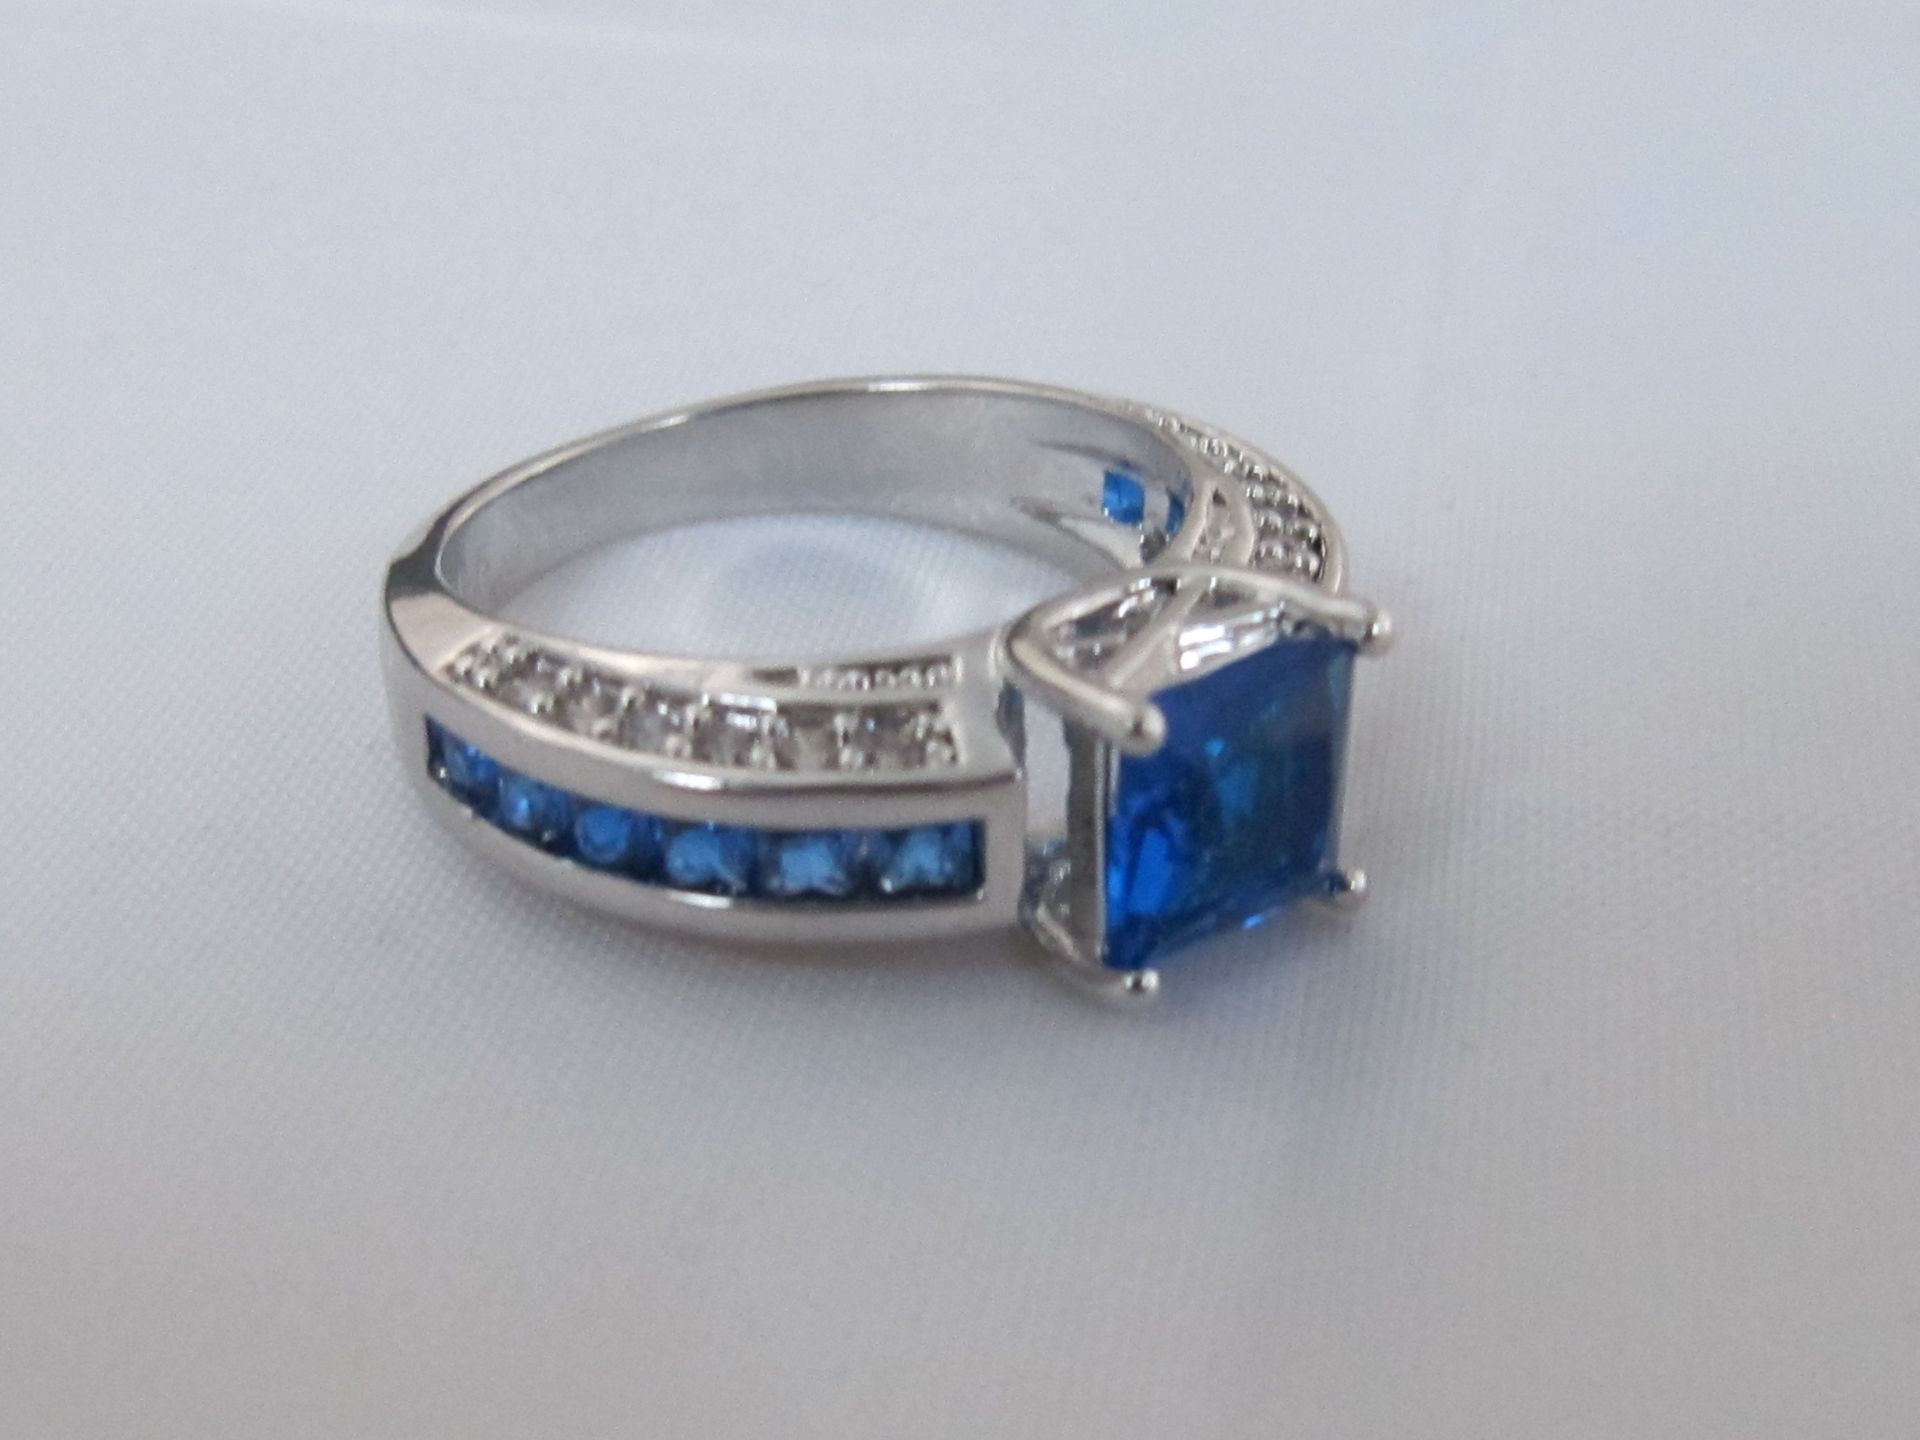 10k White Gold Filled with Blue Sapphires. Size Q.